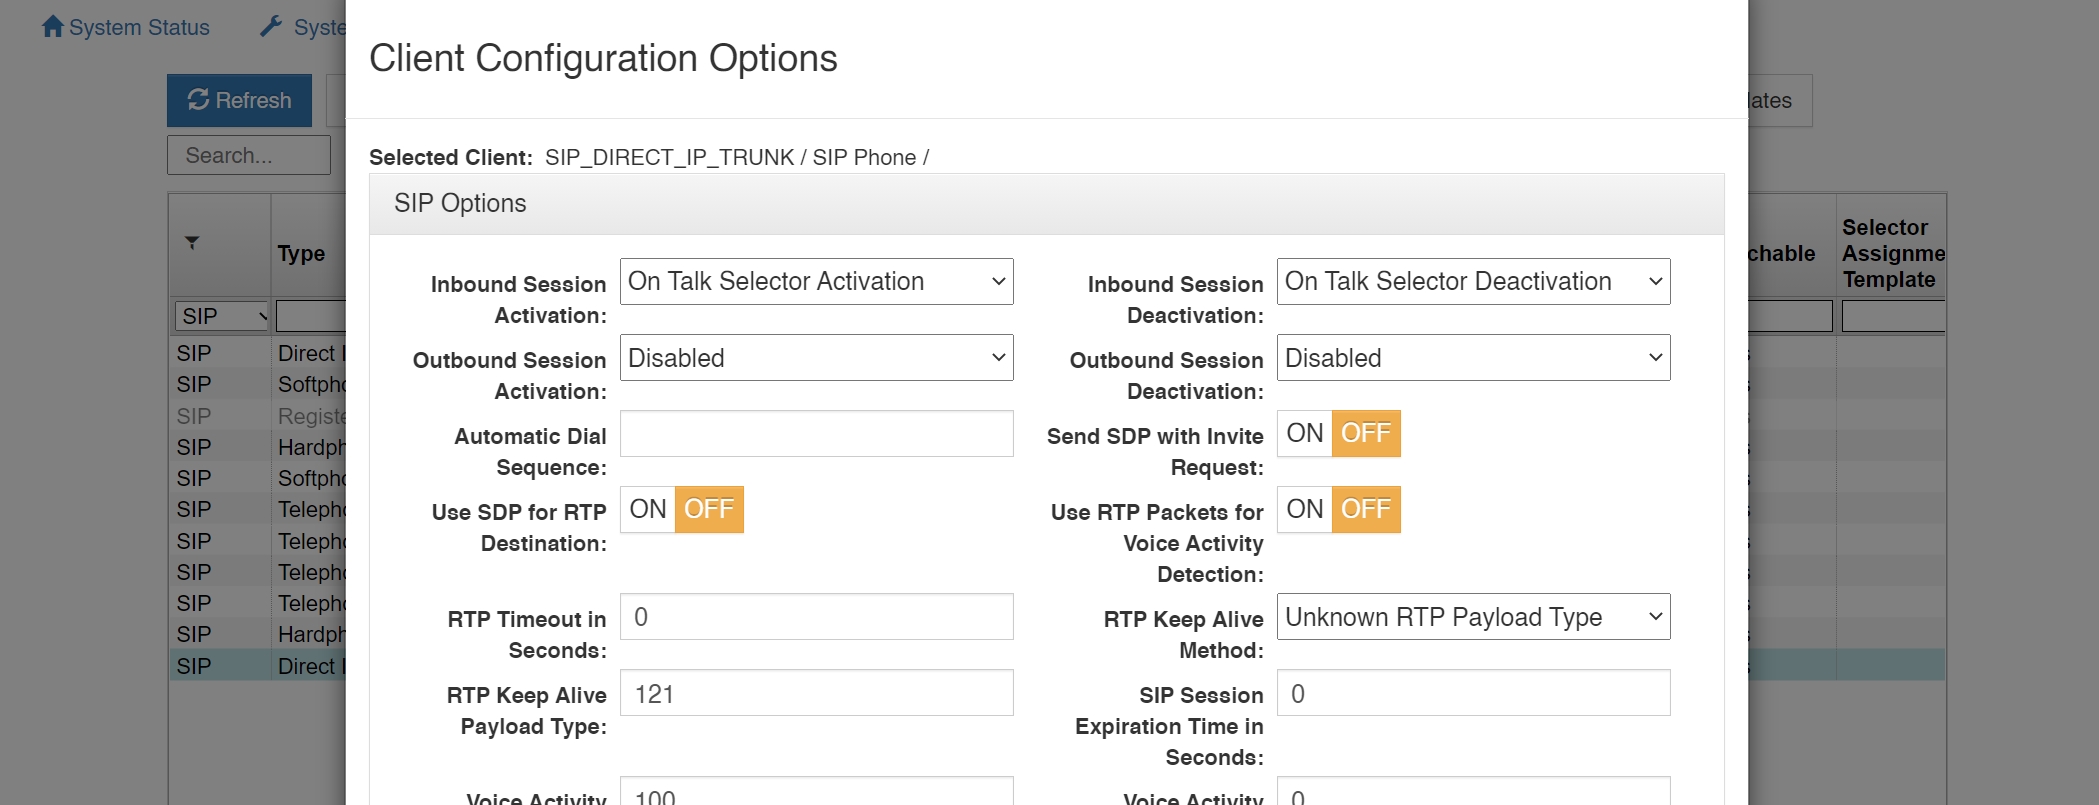 screenshot of vcom system administration client sip trunk configuration options